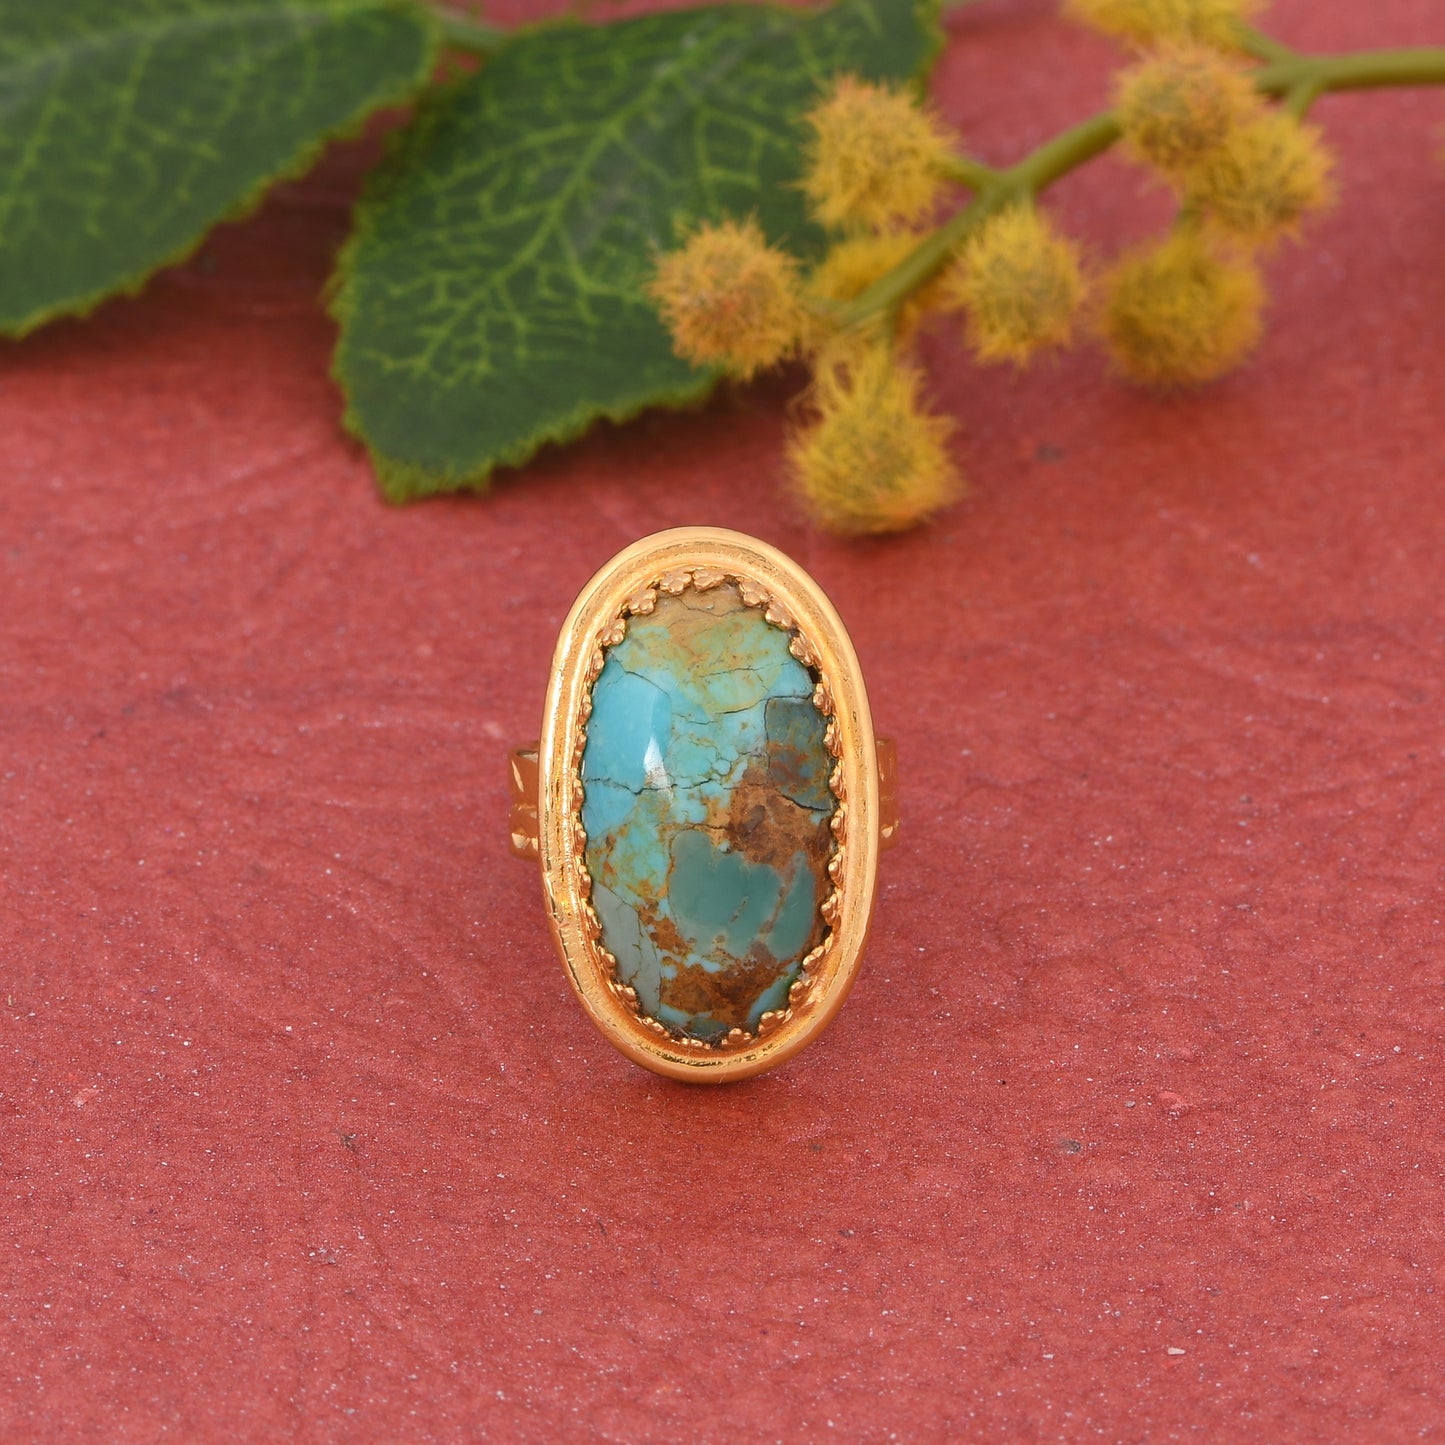 Kingman Turquoise 2.5micron 18k Gold Plated Ring For Mother